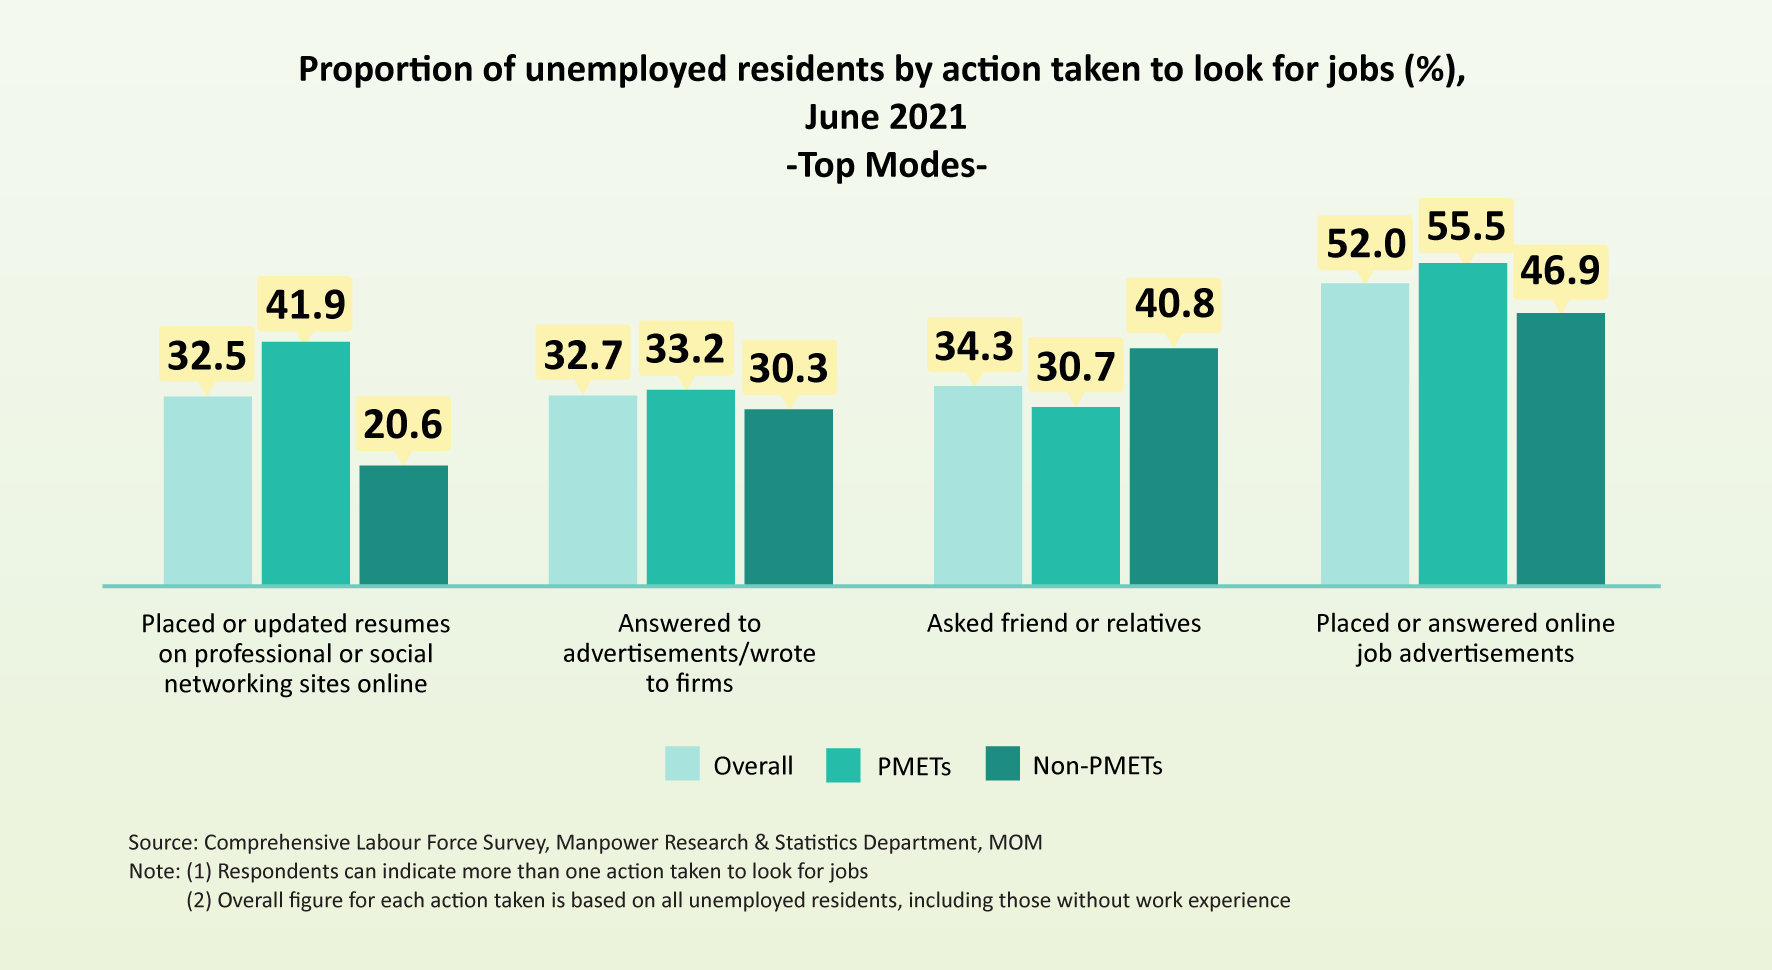 Proportion of unemployed residents by action taken to look for jobs (%), June 2021 - Top Modes